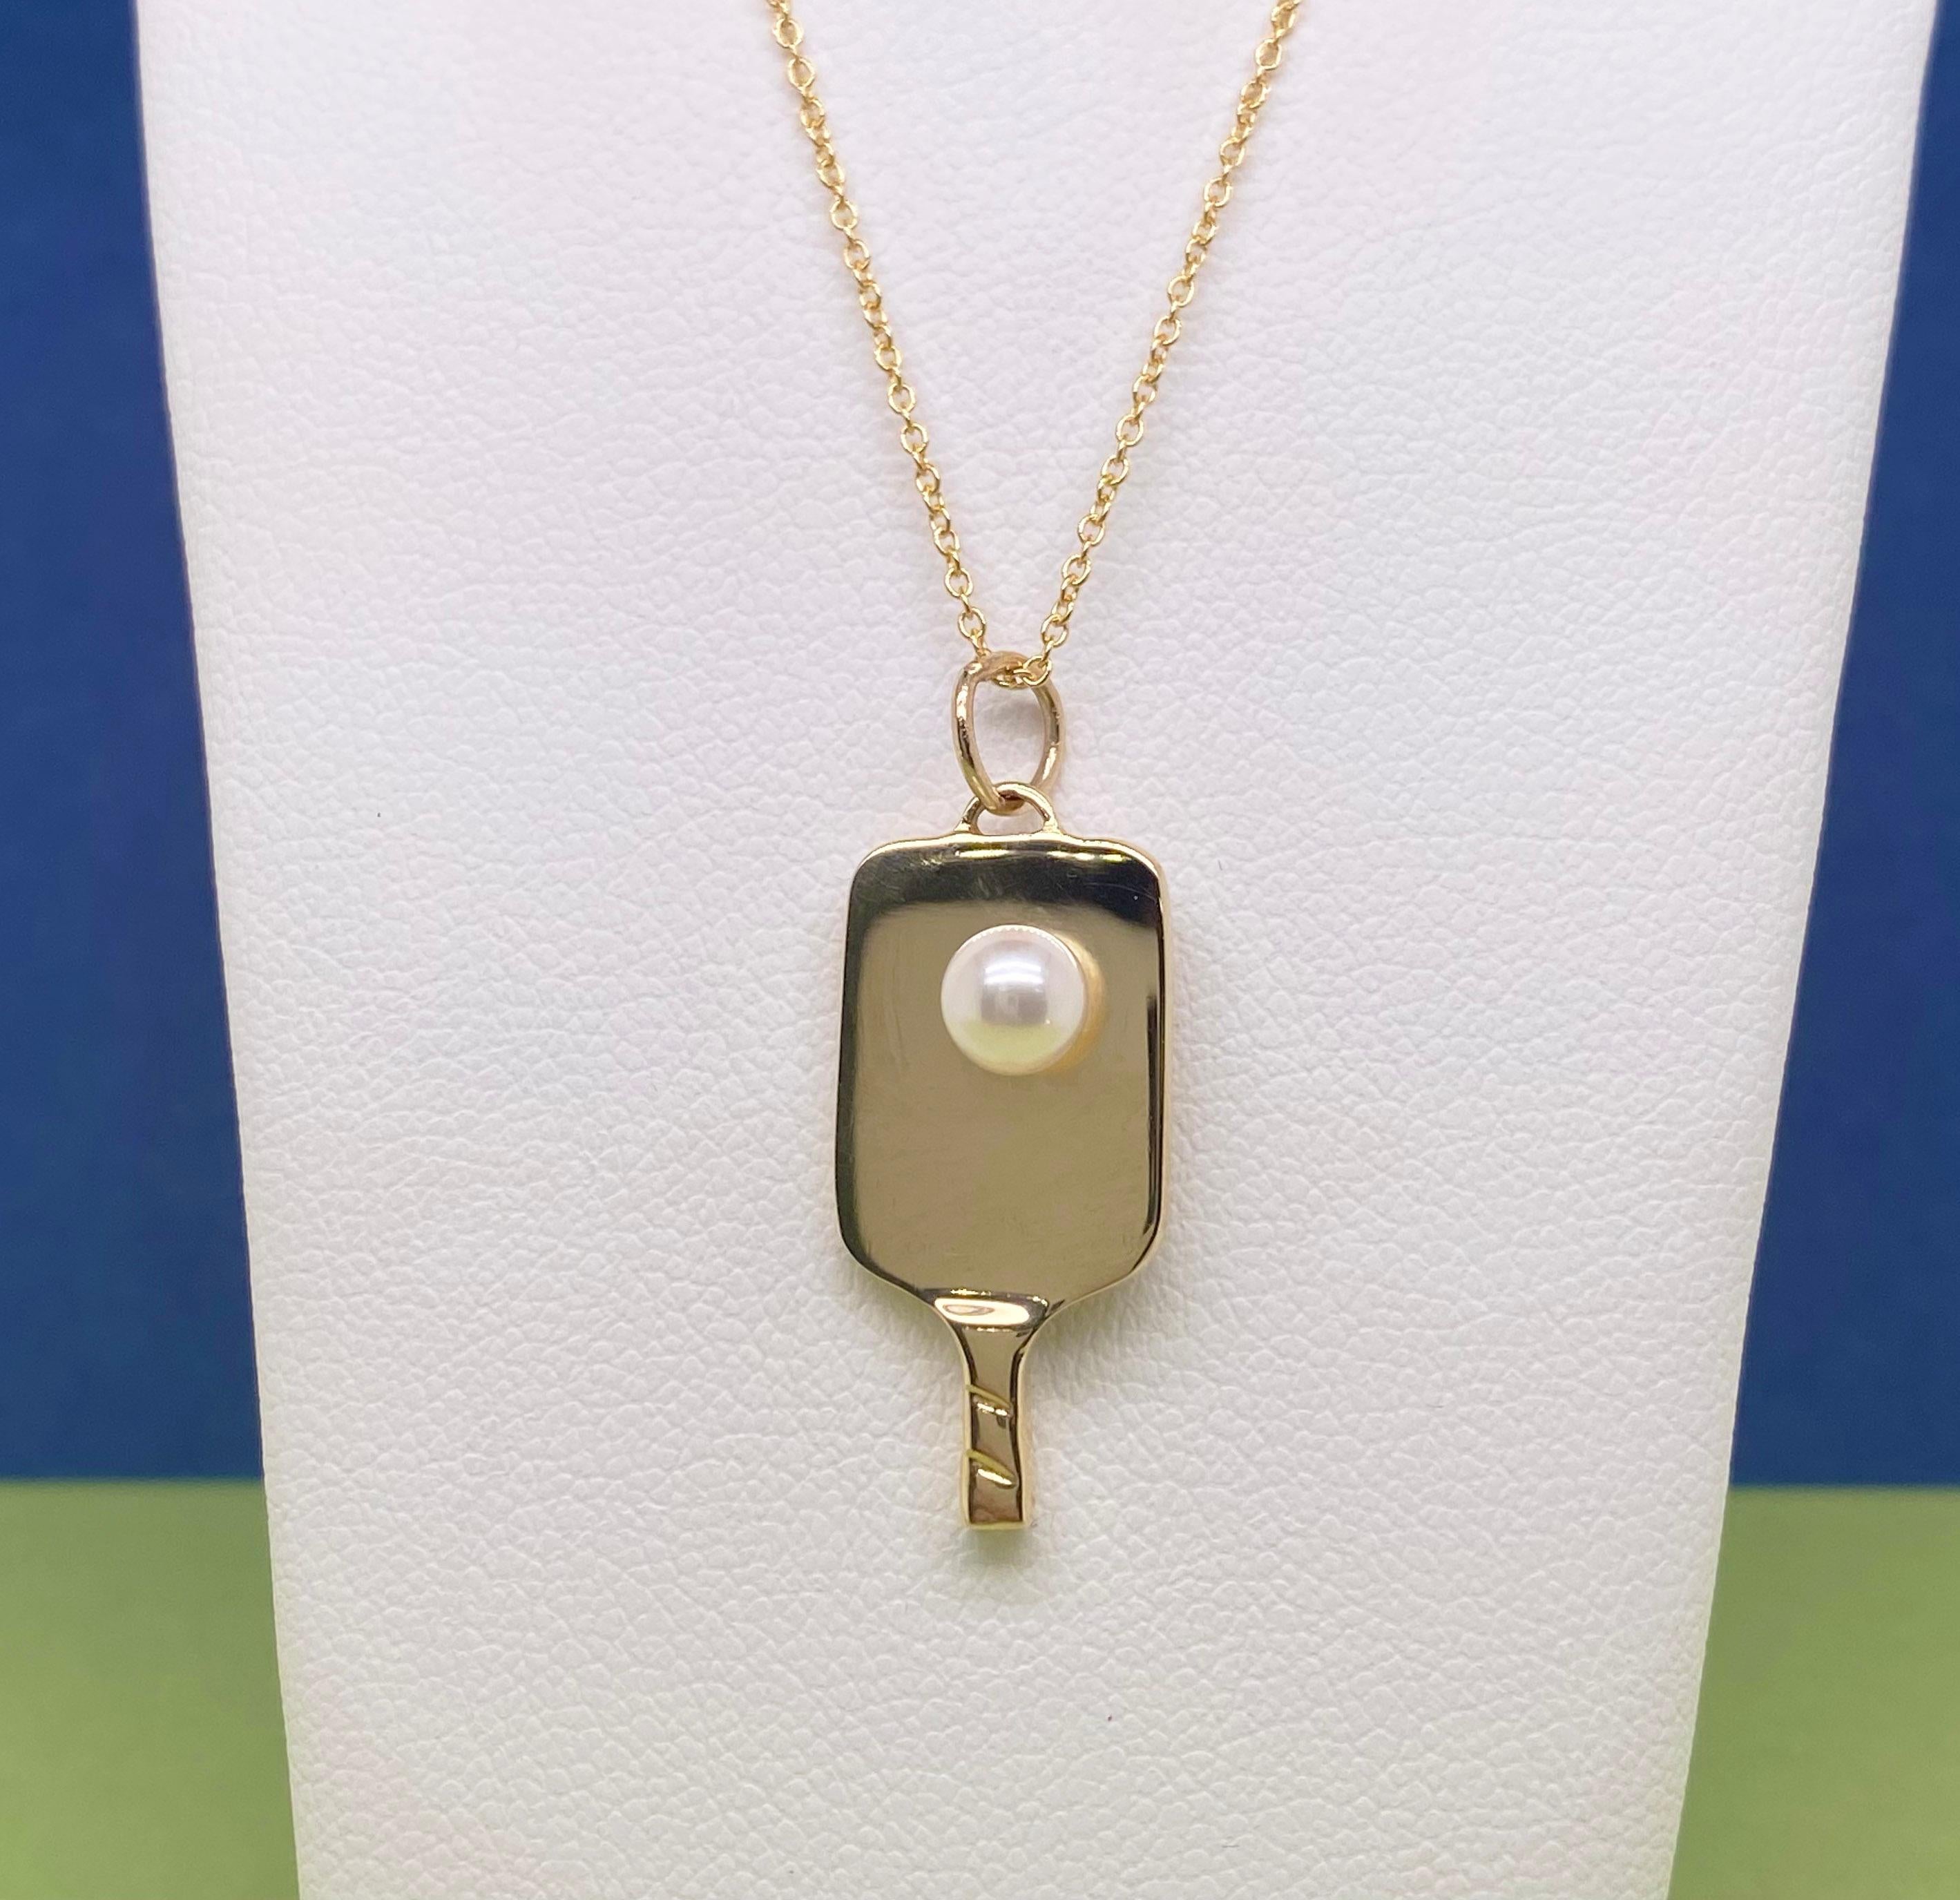 High quality pickleball jewelry is hard to find! This handmade pickleball pendant is the best quality design you will find. It comes with a genuine cultured pearls and is solid 14 karat yellow gold.  If you love Pickleball, you will love showing off